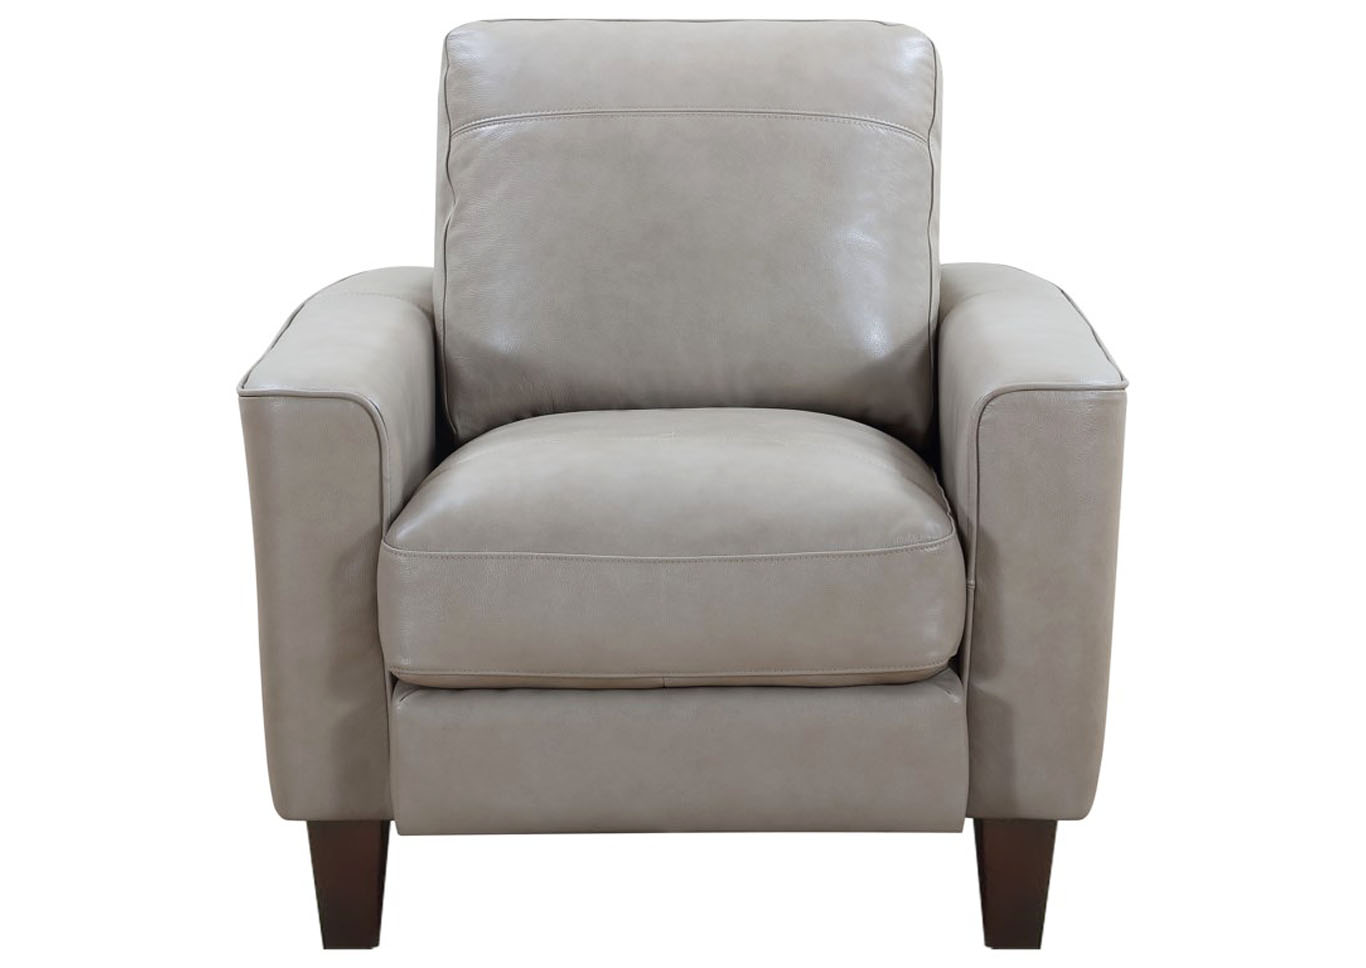 Chino Top Grain Leather Chair Beige Nader S Furniture